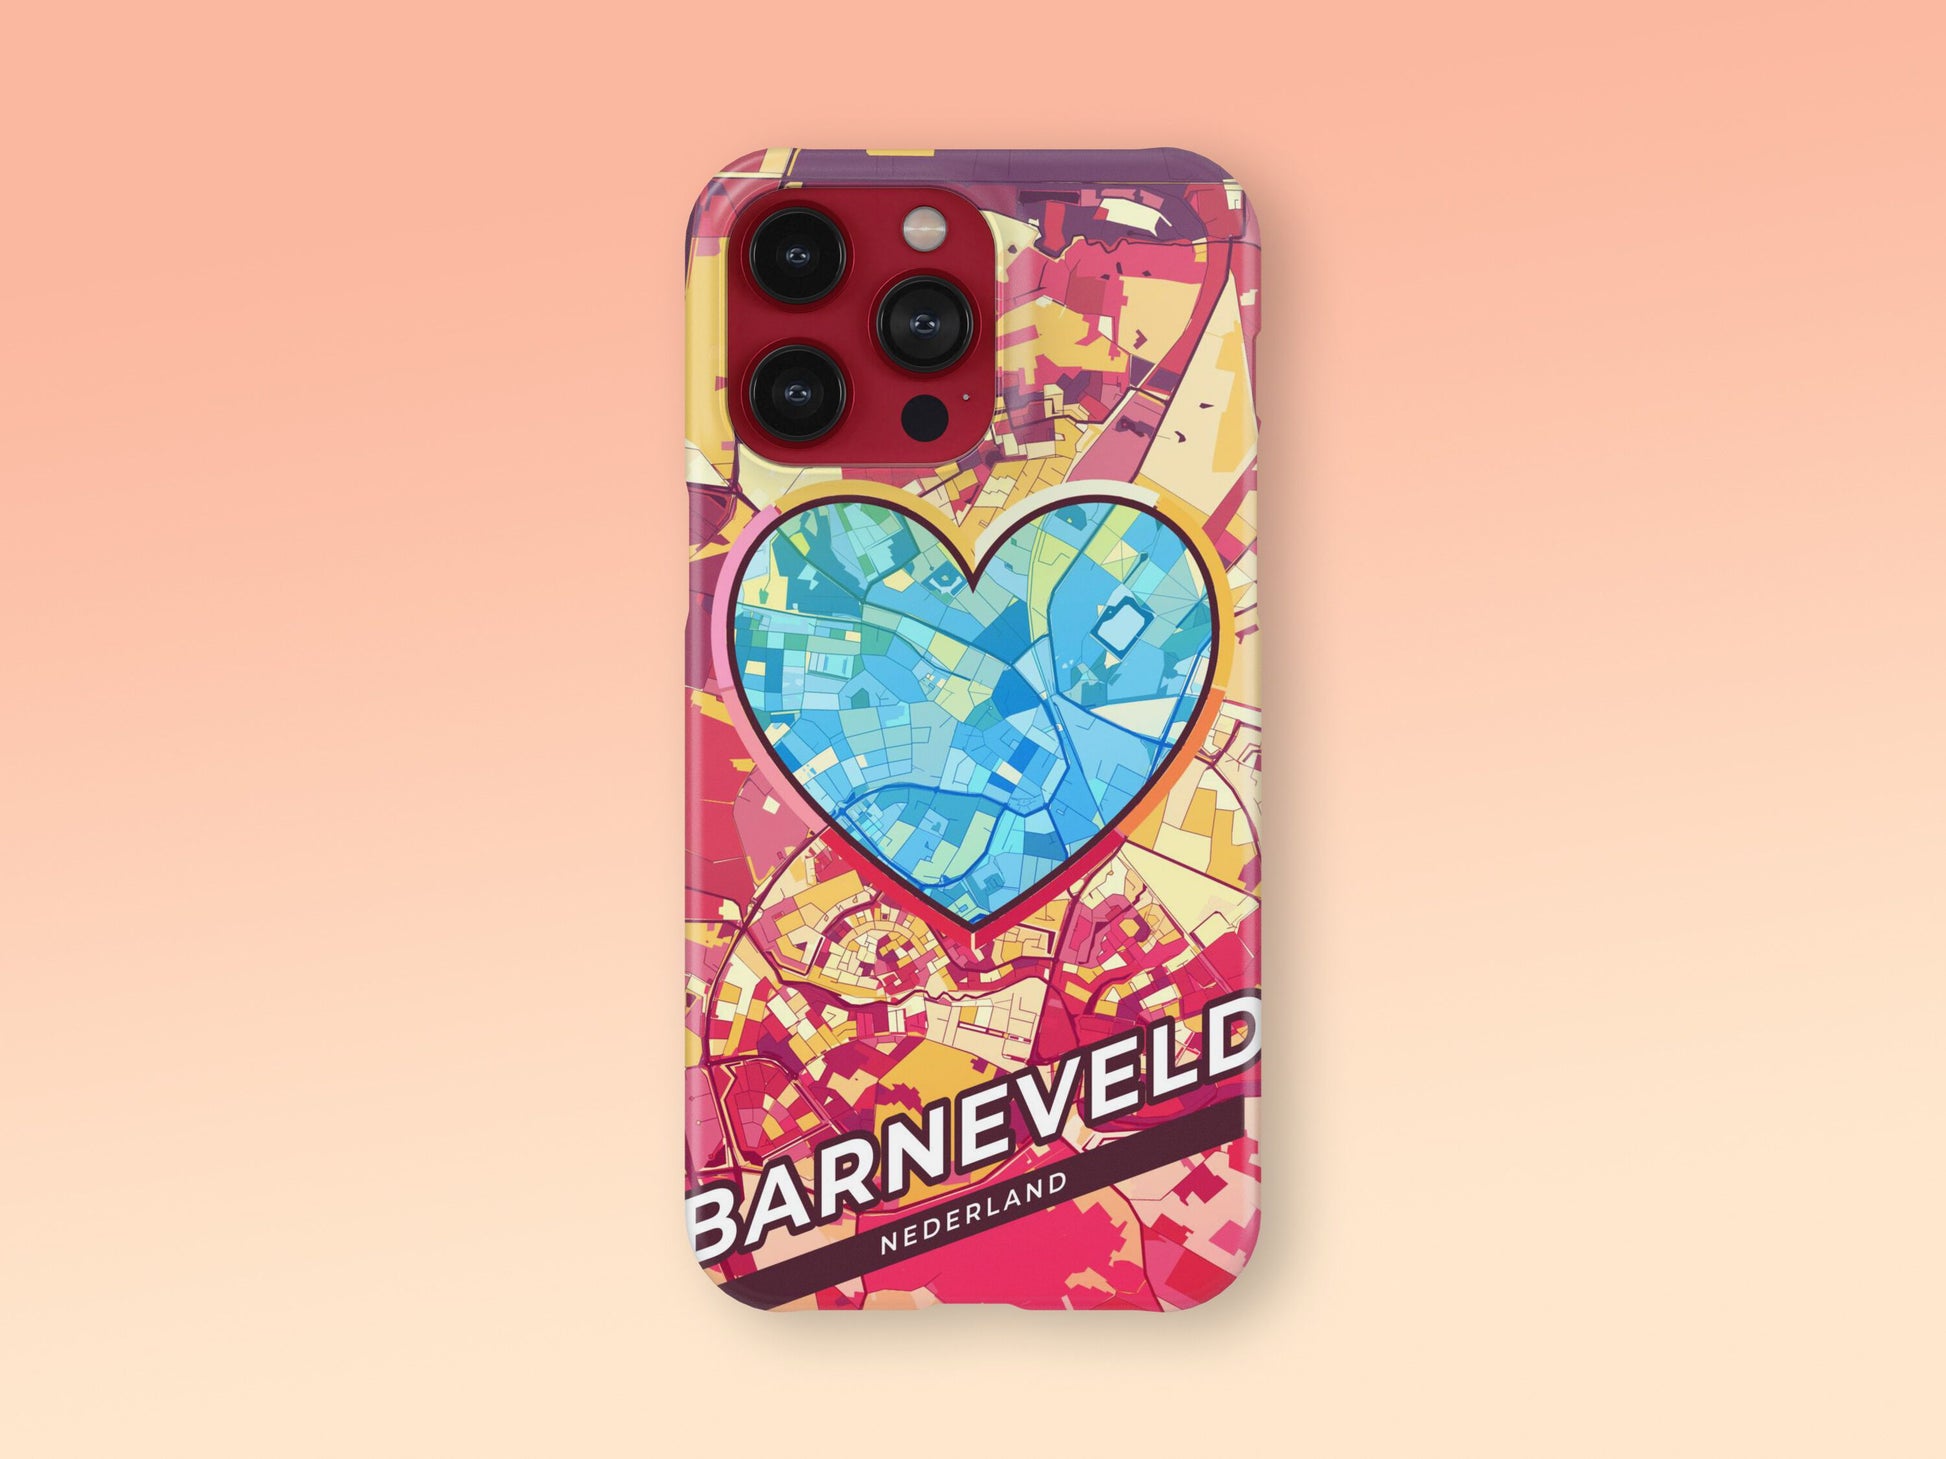 Barneveld Netherlands slim phone case with colorful icon. Birthday, wedding or housewarming gift. Couple match cases. 2